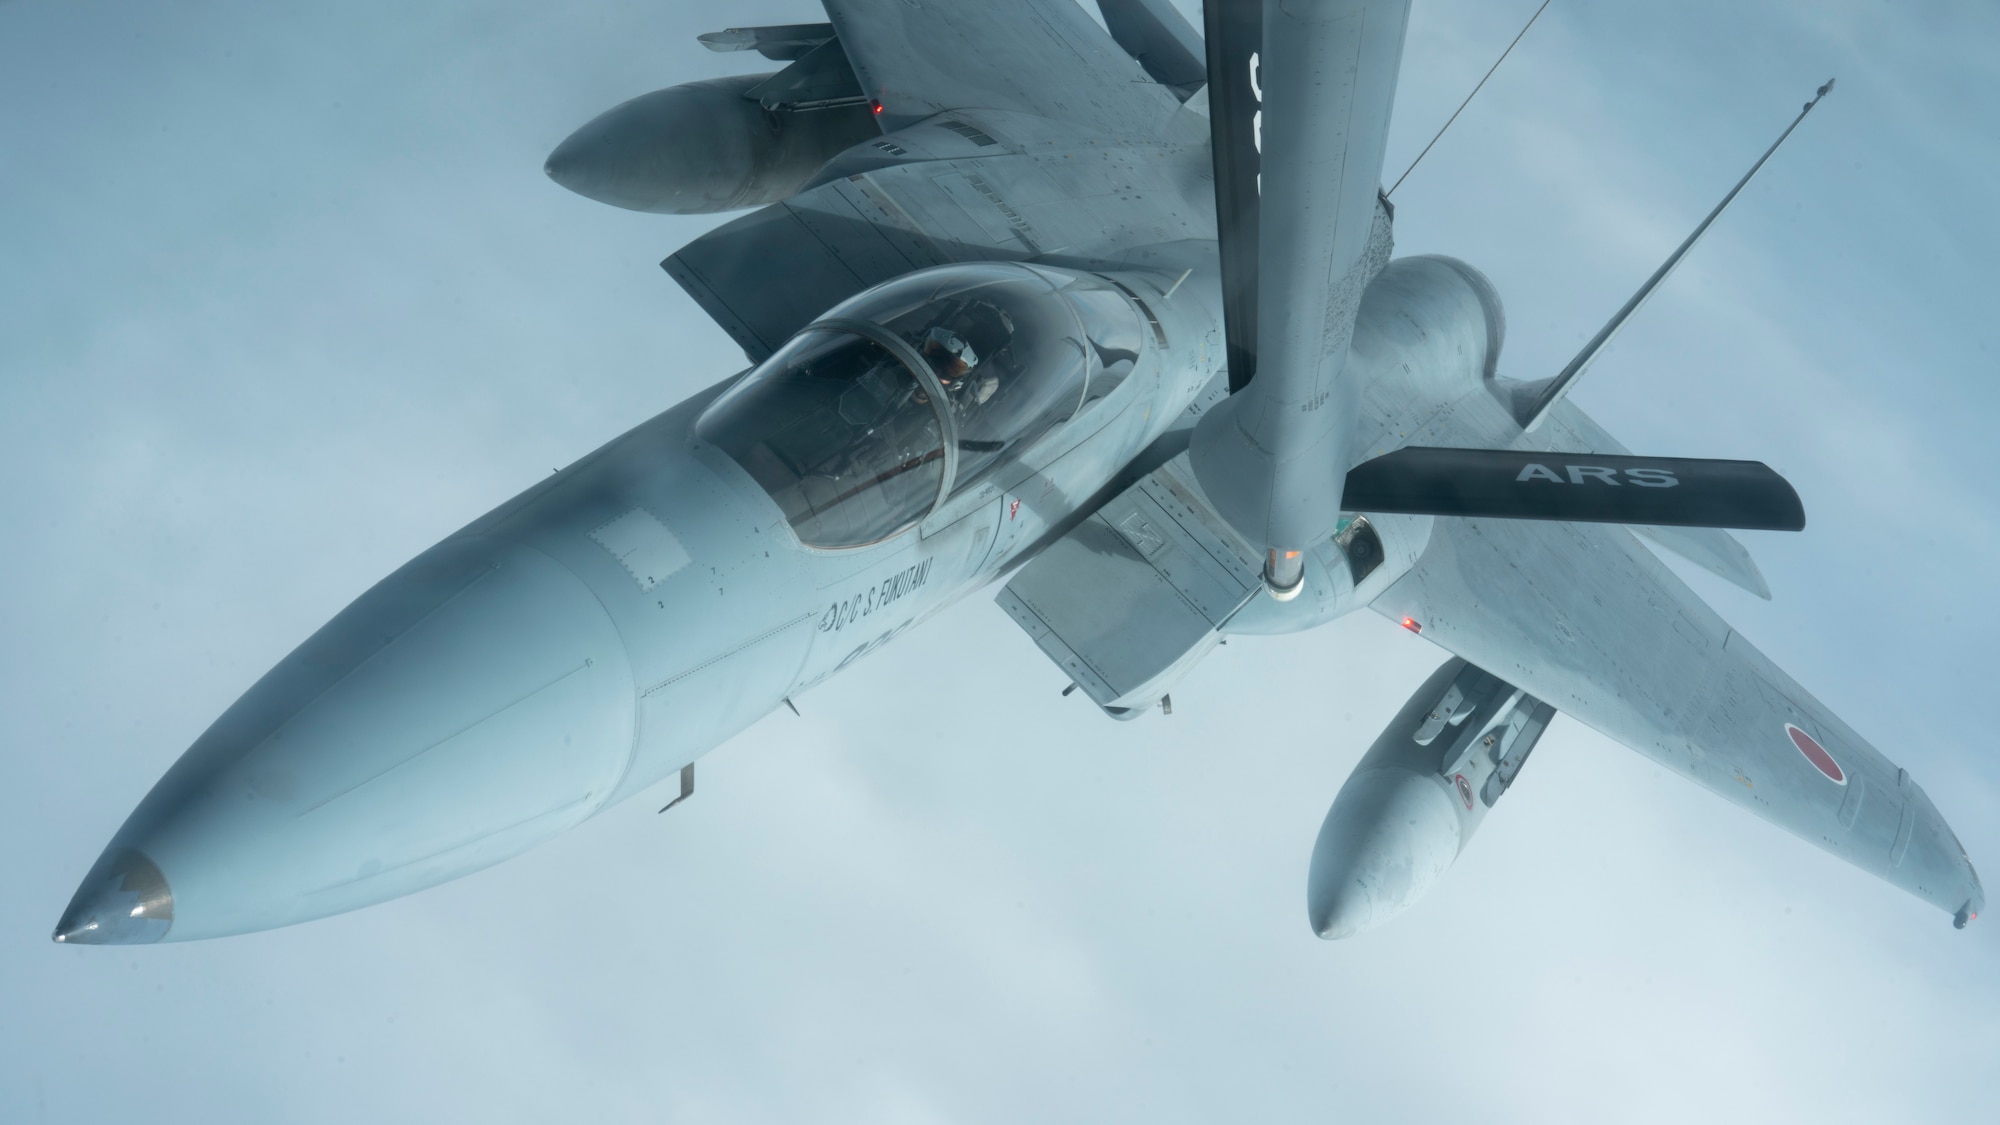 A Japan Air Self-Defense Force F-15J receives fuel from a 909th Air Refueling Squadron KC-135 Stratotanker in support of exercise Southern Beach 22-2 over the Pacific Ocean, Jan. 19, 2022. This iteration marks the first time JASDF intel officers have joined mission planning, and their use of an E-2C Airborne Warning and Control System will assist their allies and partners in the air, providing aid to remote islands. (U.S. Air Force photo by Airman 1st Class Moses Taylor)